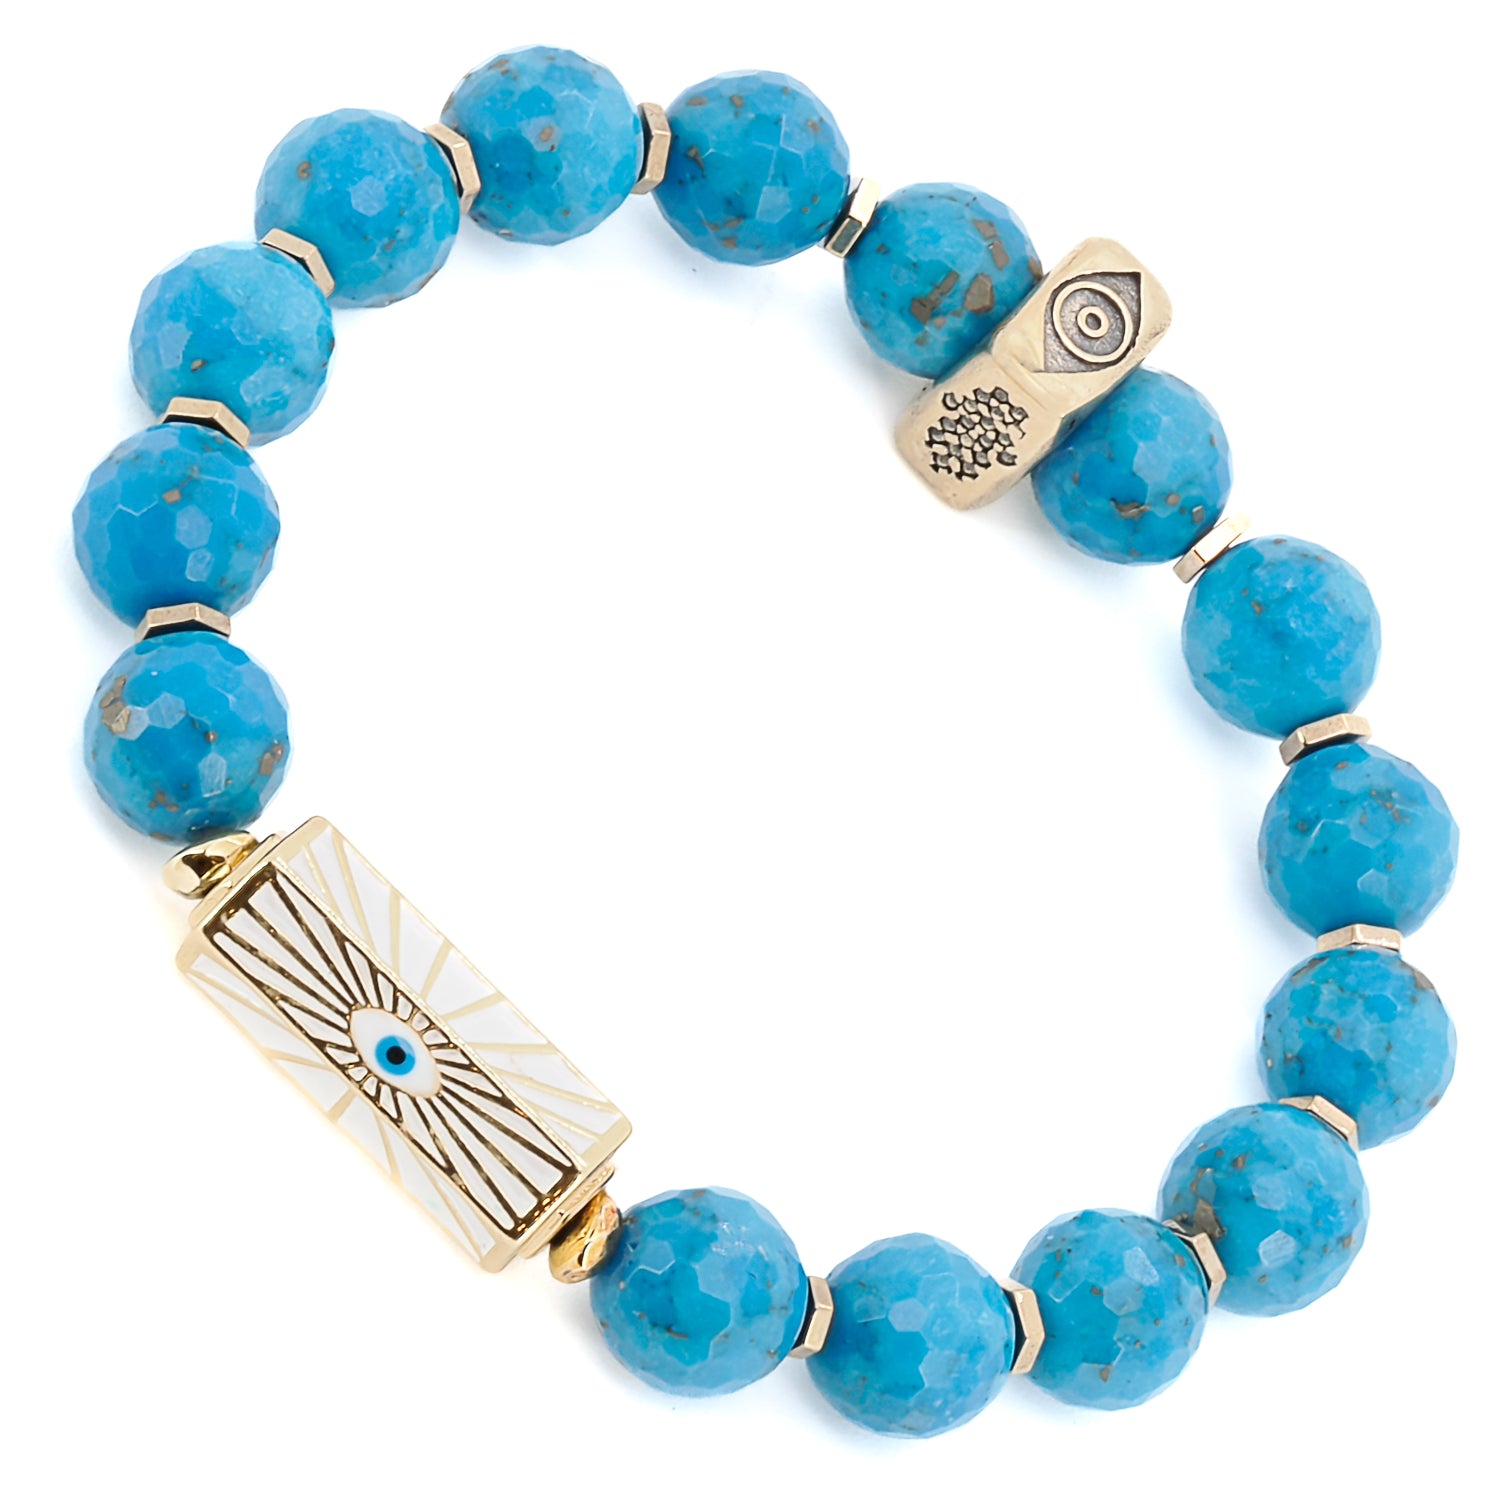 Discover the beauty and symbolism of the Turquoise Luck and Protection Bracelet, featuring turquoise stone and powerful symbols of luck and protection.